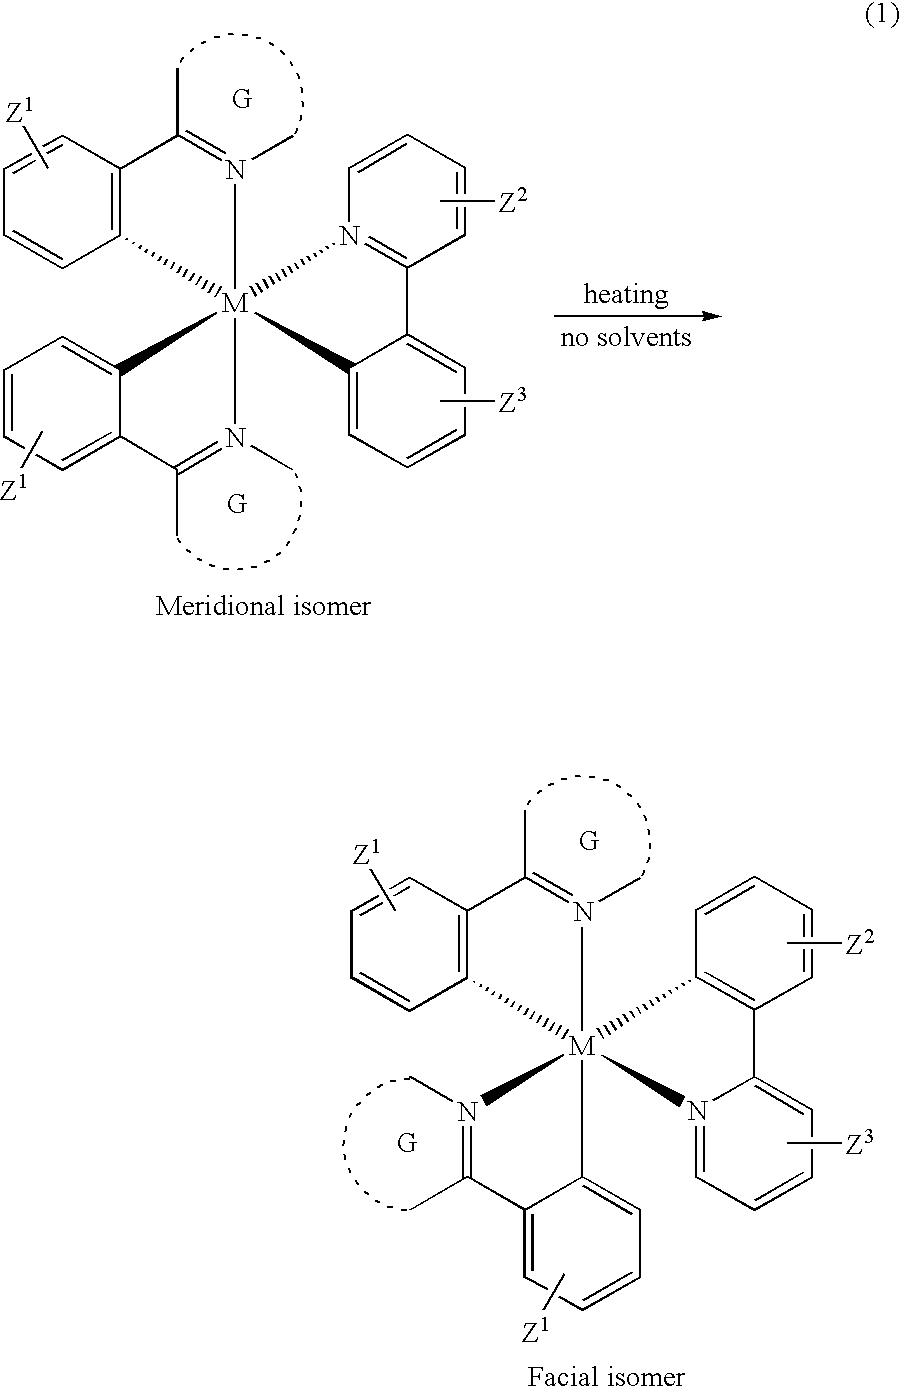 Manufacturing process for facial tris-cyclometallated complexes